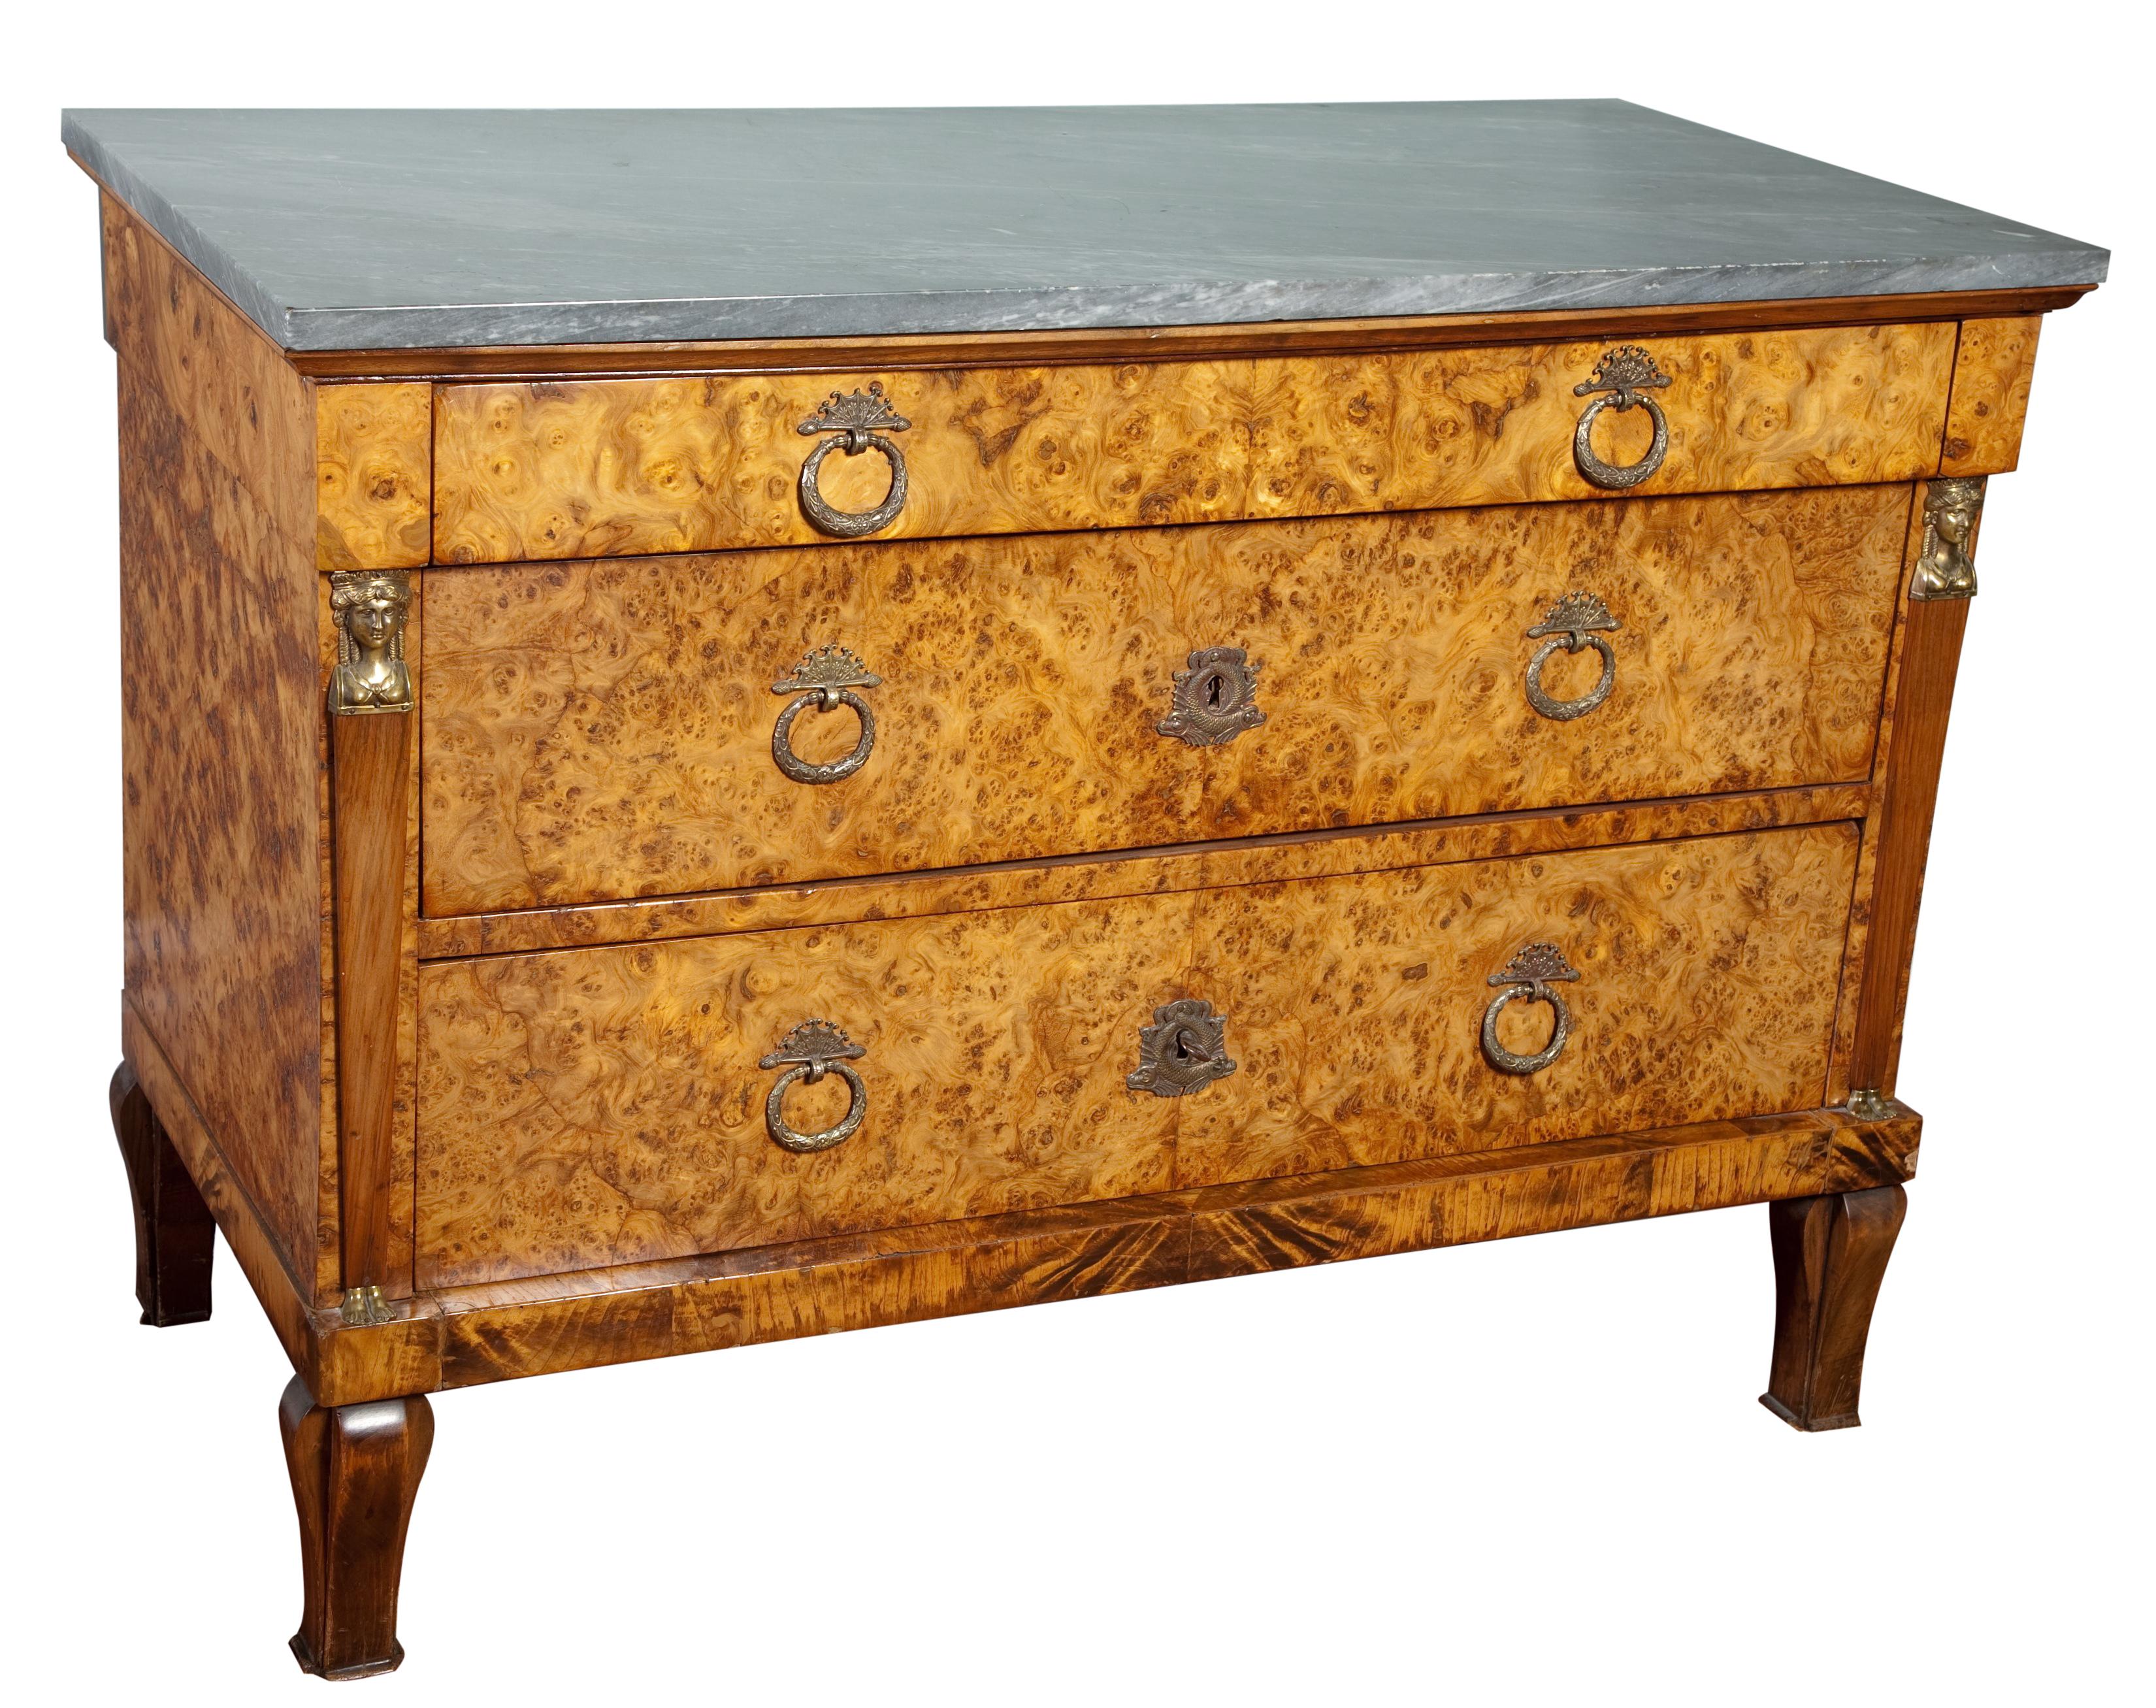 A Swedish Empire three-drawer commode chest veneered in burled bird's-eye elm emblematic of  Baltic  furniture in the 18th-19th centuries, the rectangular side columns mounted with brass Egyptian heads and feet, topped with a slab of bleu turquin